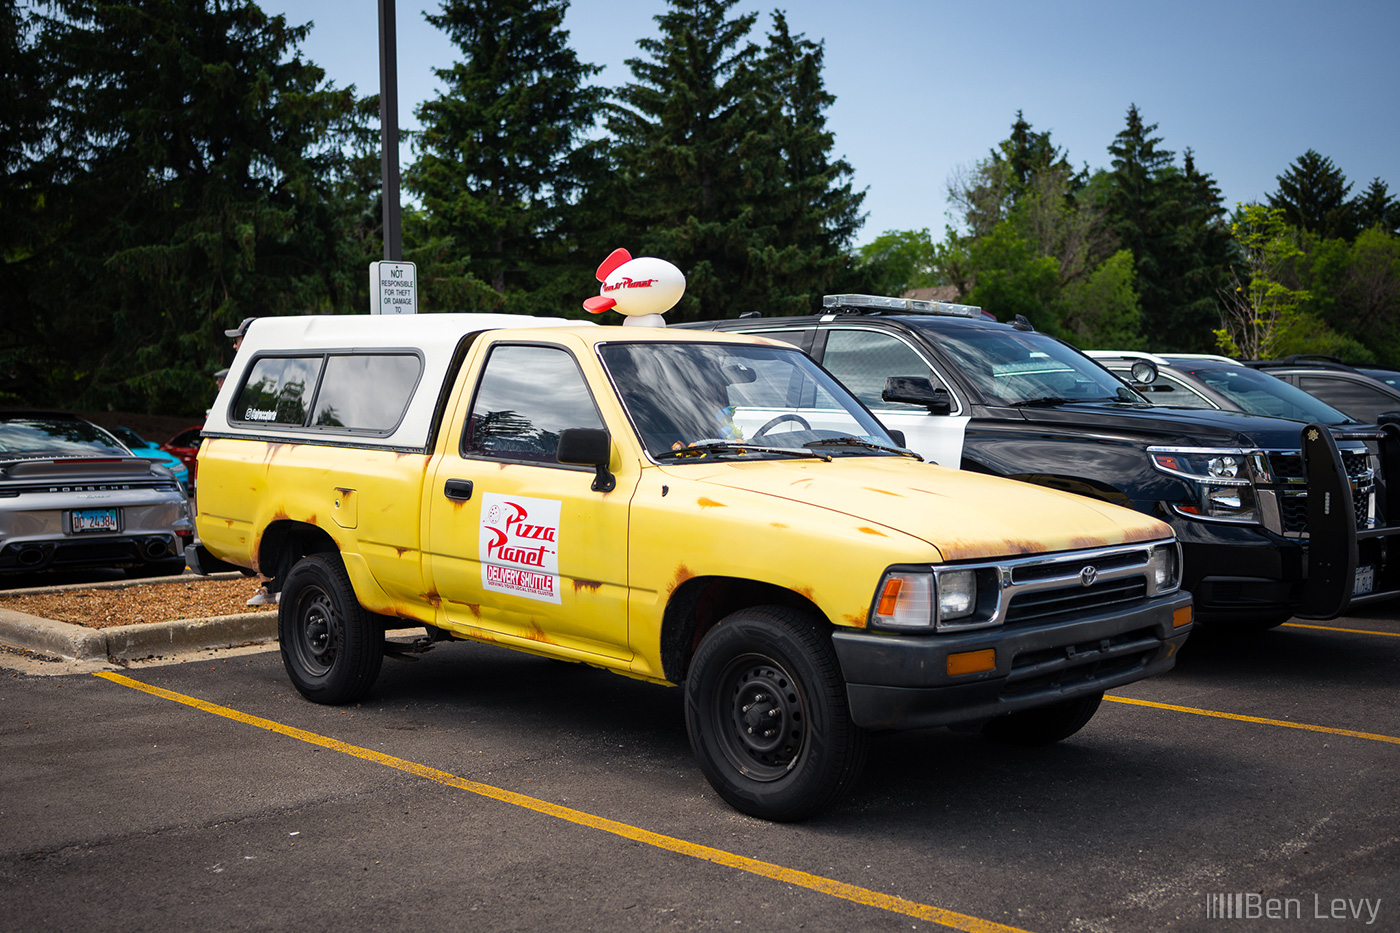 Toyota Pickup as Pizza Planet Truck